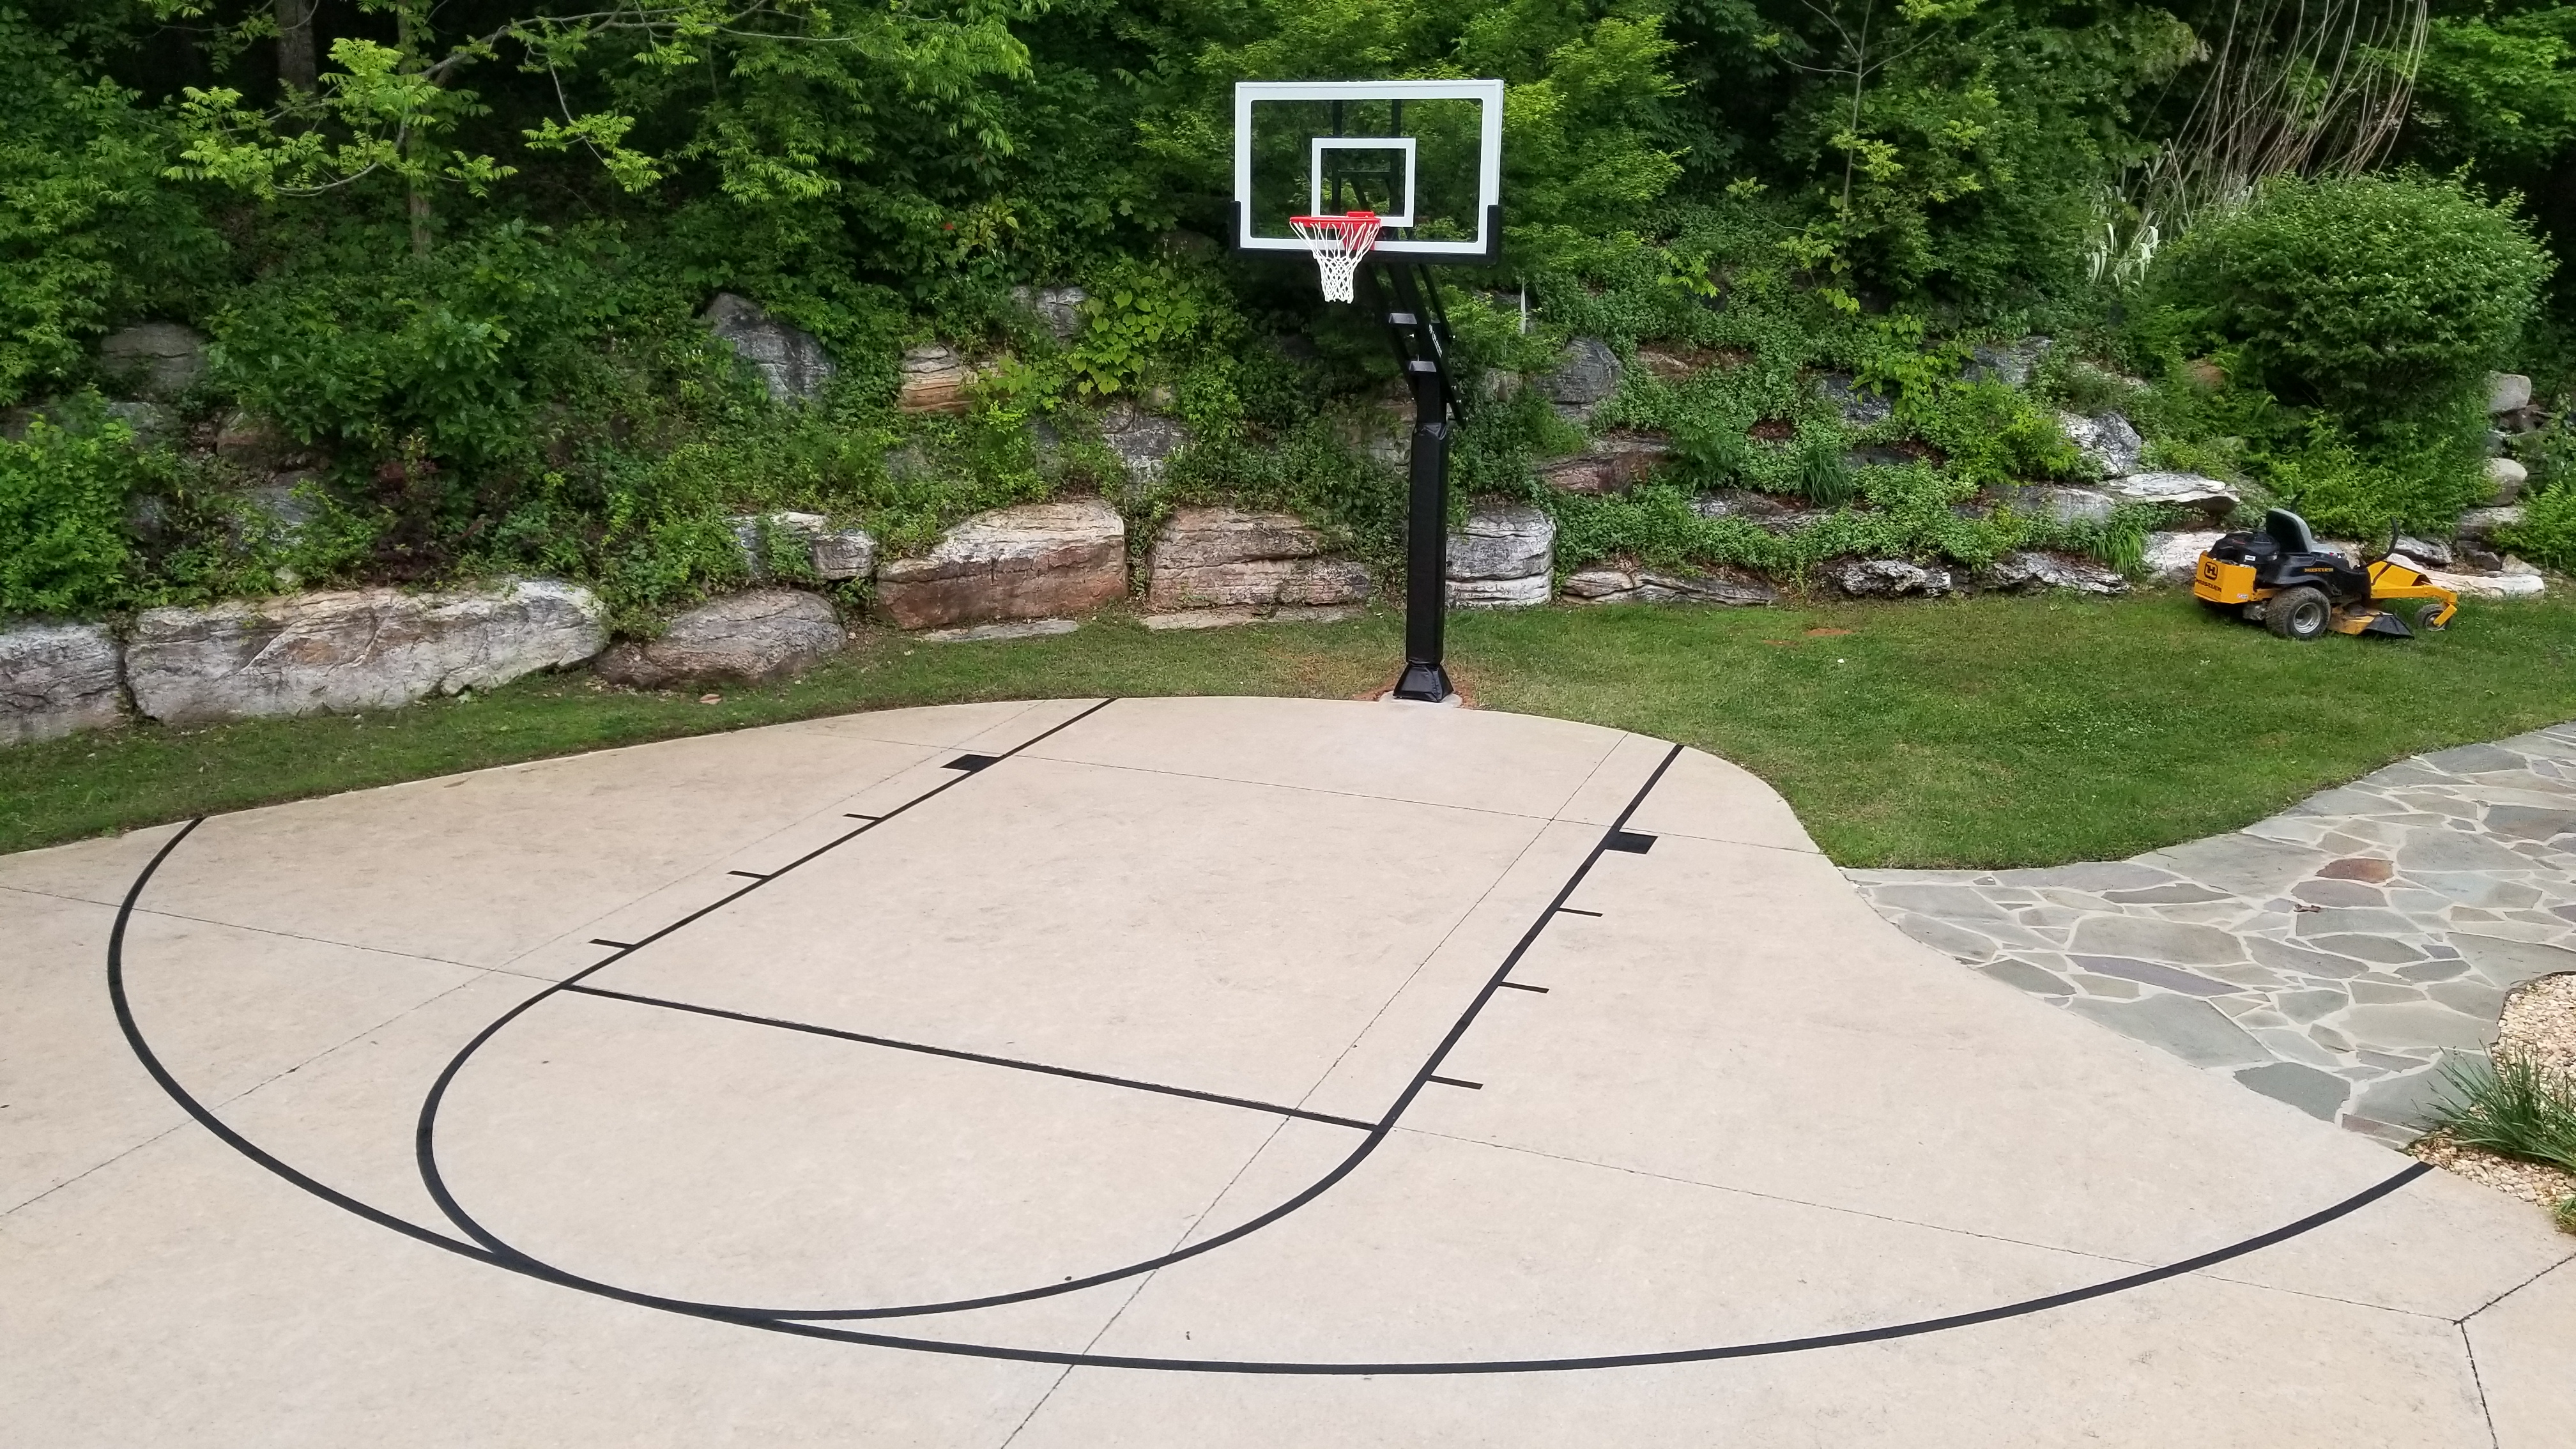 Driveway Line Painting Precise Assemblies, How Much Does It Cost To Paint An Outdoor Basketball Court